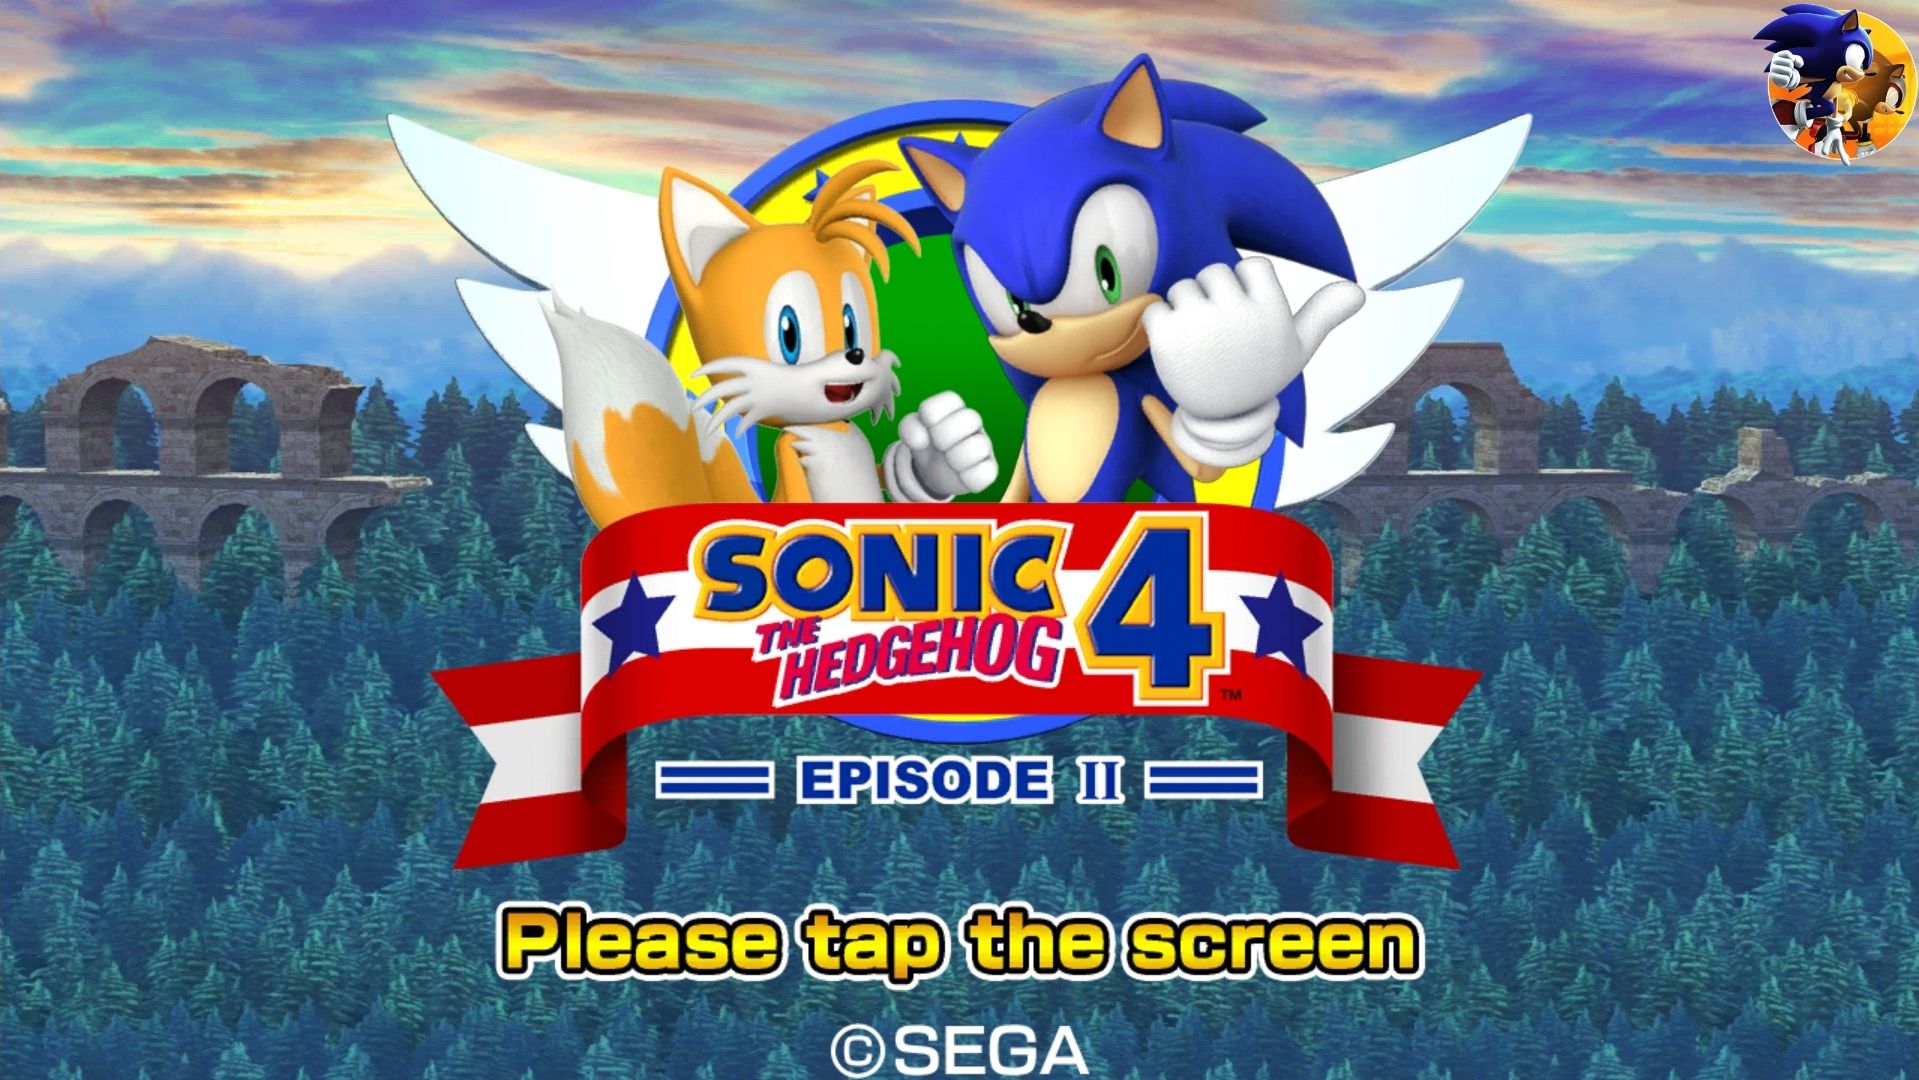 sonic 4 episode 2 online patch